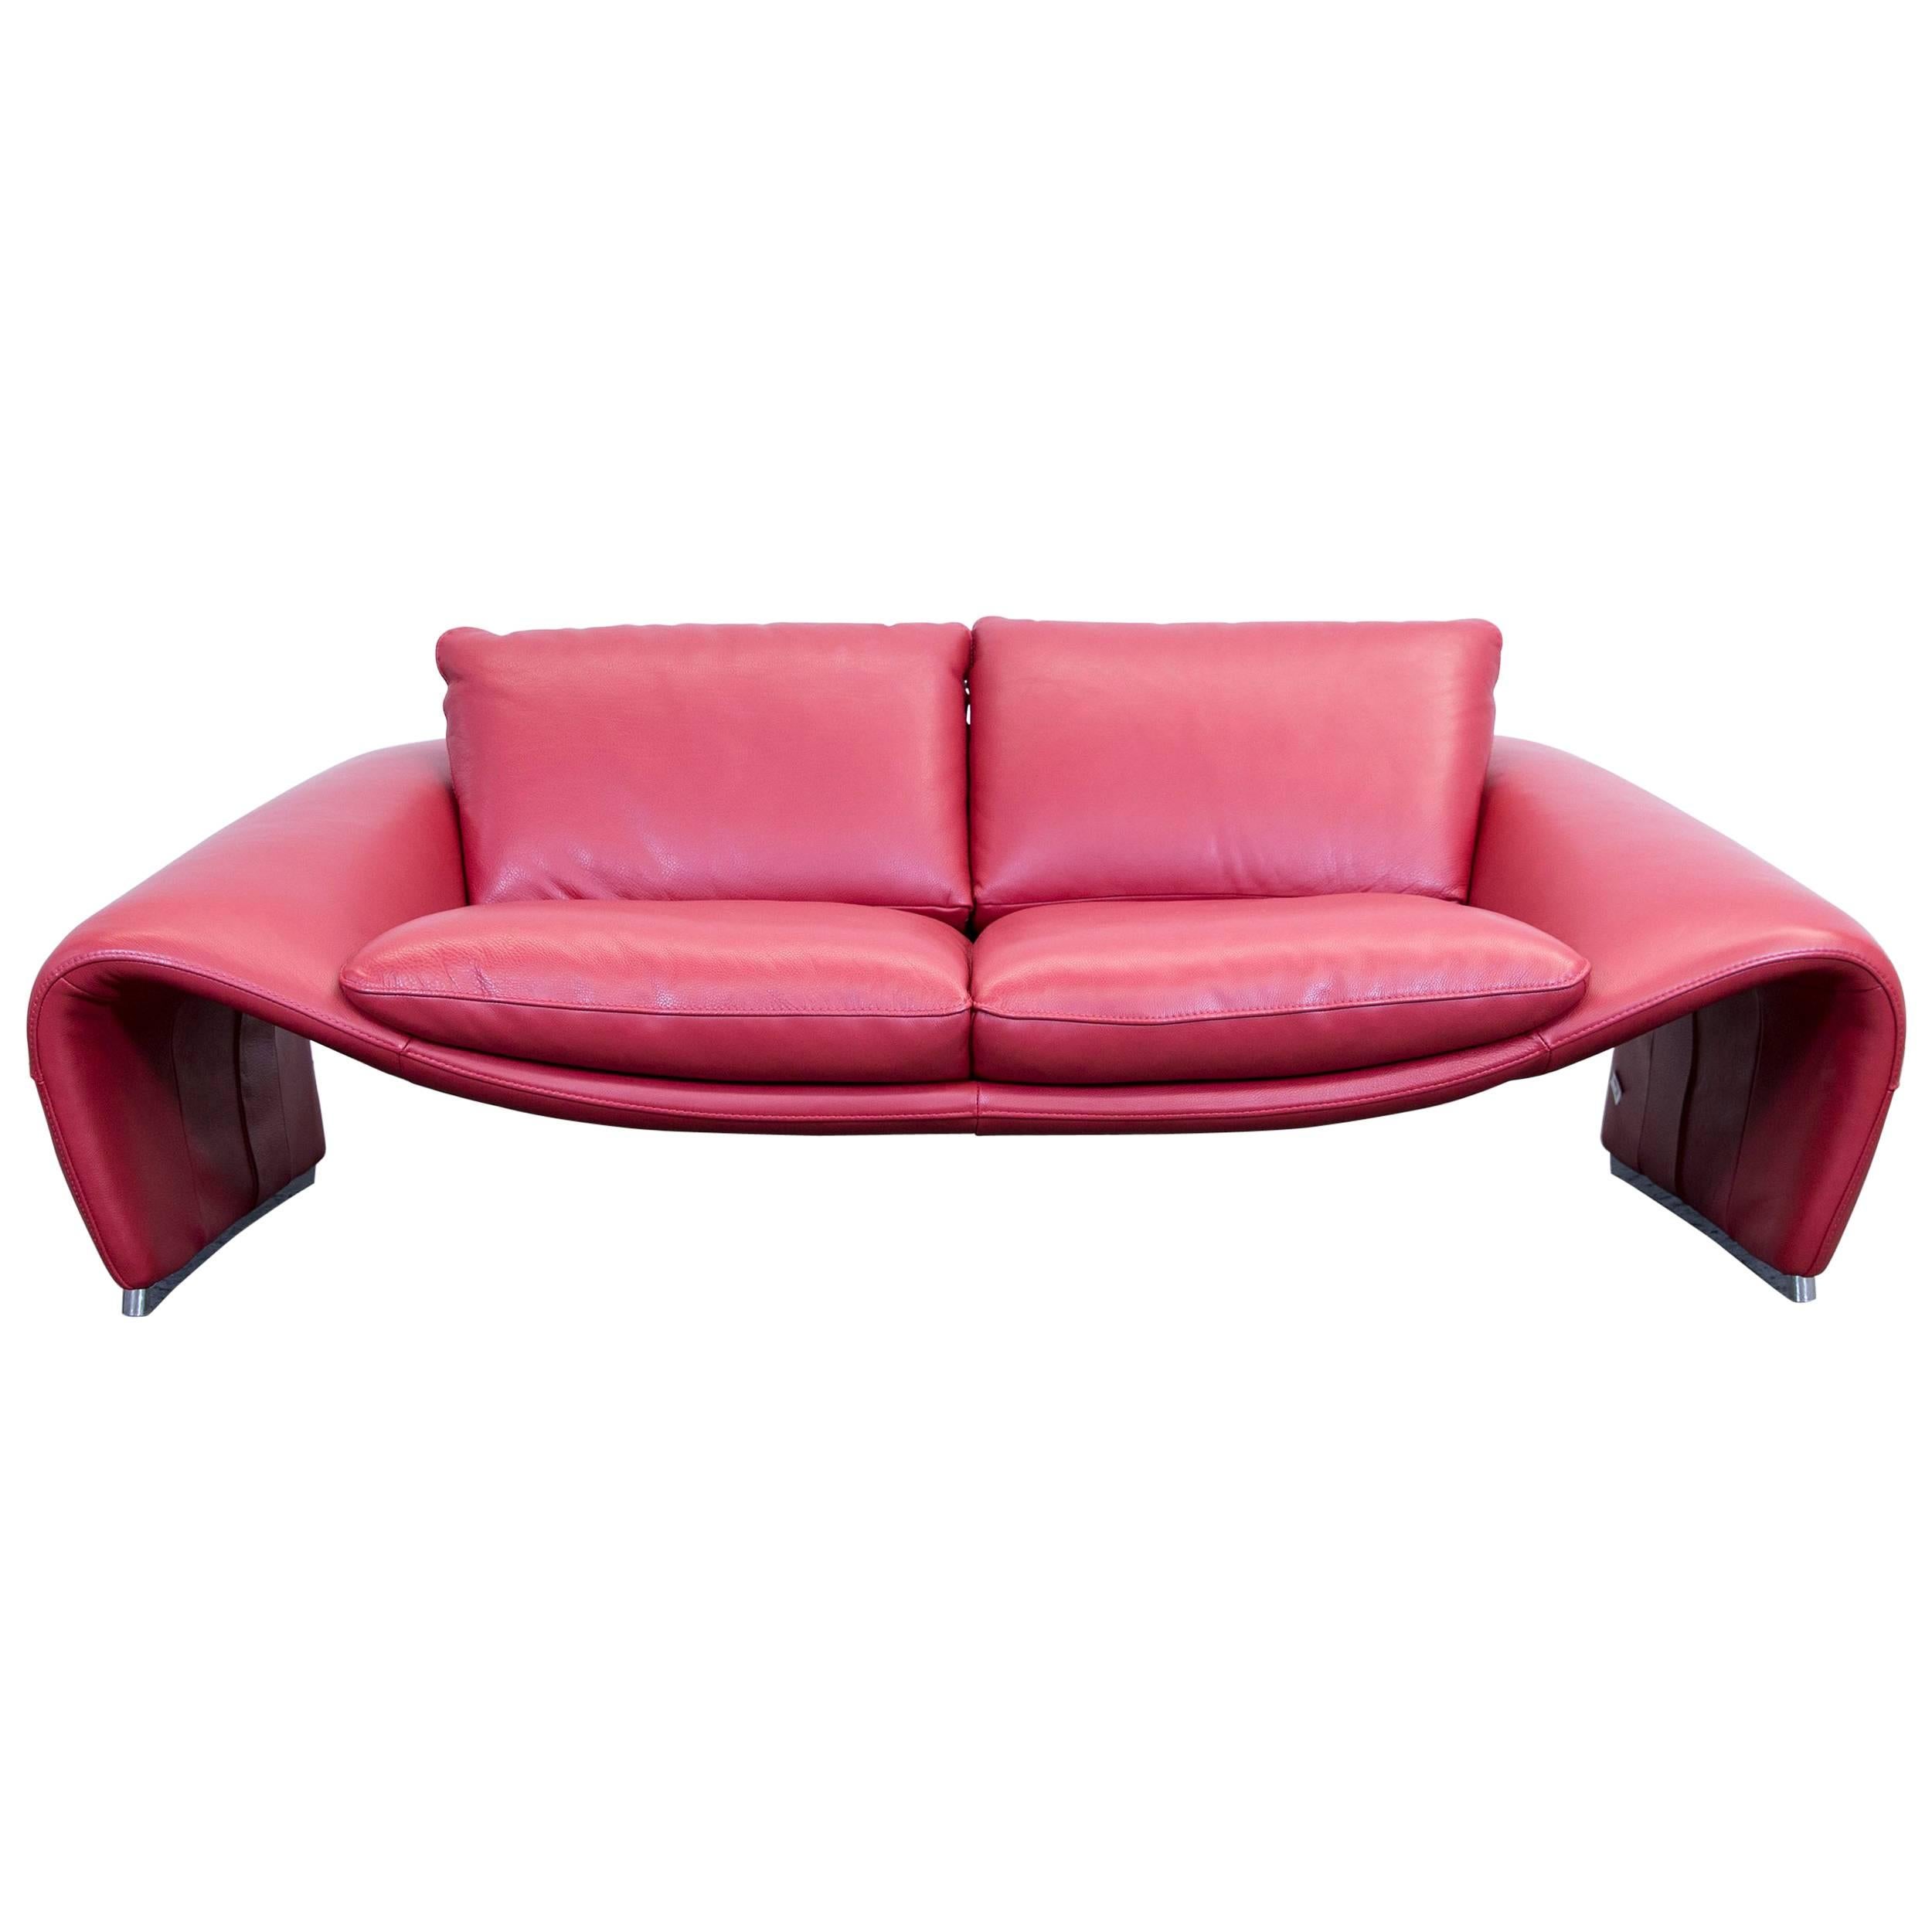 Chateau d'Ax Voga Designer Sofa Leather Red Three-Seat Function Couch Modern